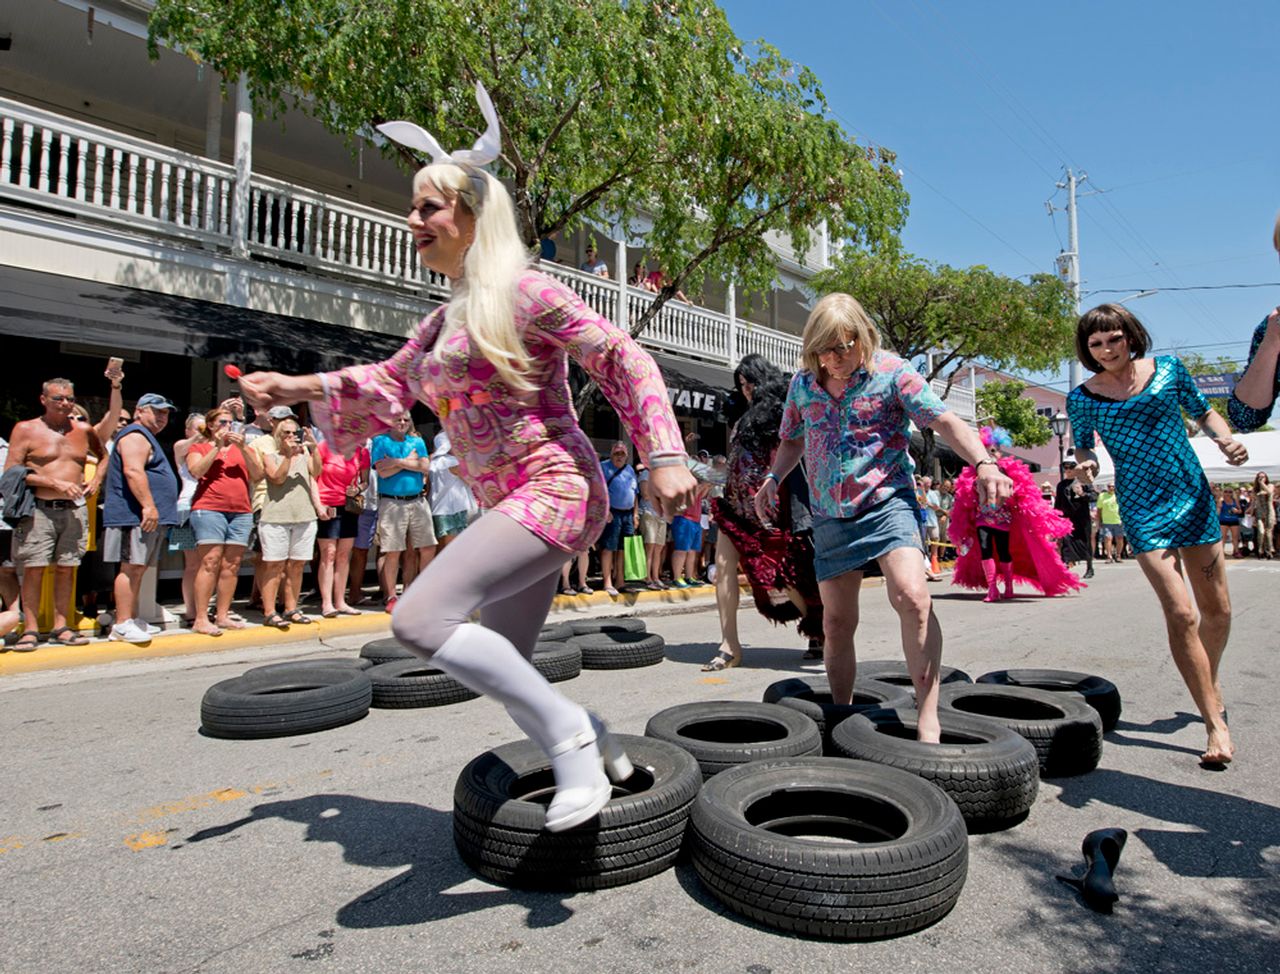 The annual Drag Race is a playful parody of auto racing, with entrants swapping high-speed cars for high-heeled shoes and female drag “ah-tire” while dashing along an improvised  racetrack on Duval Street. 